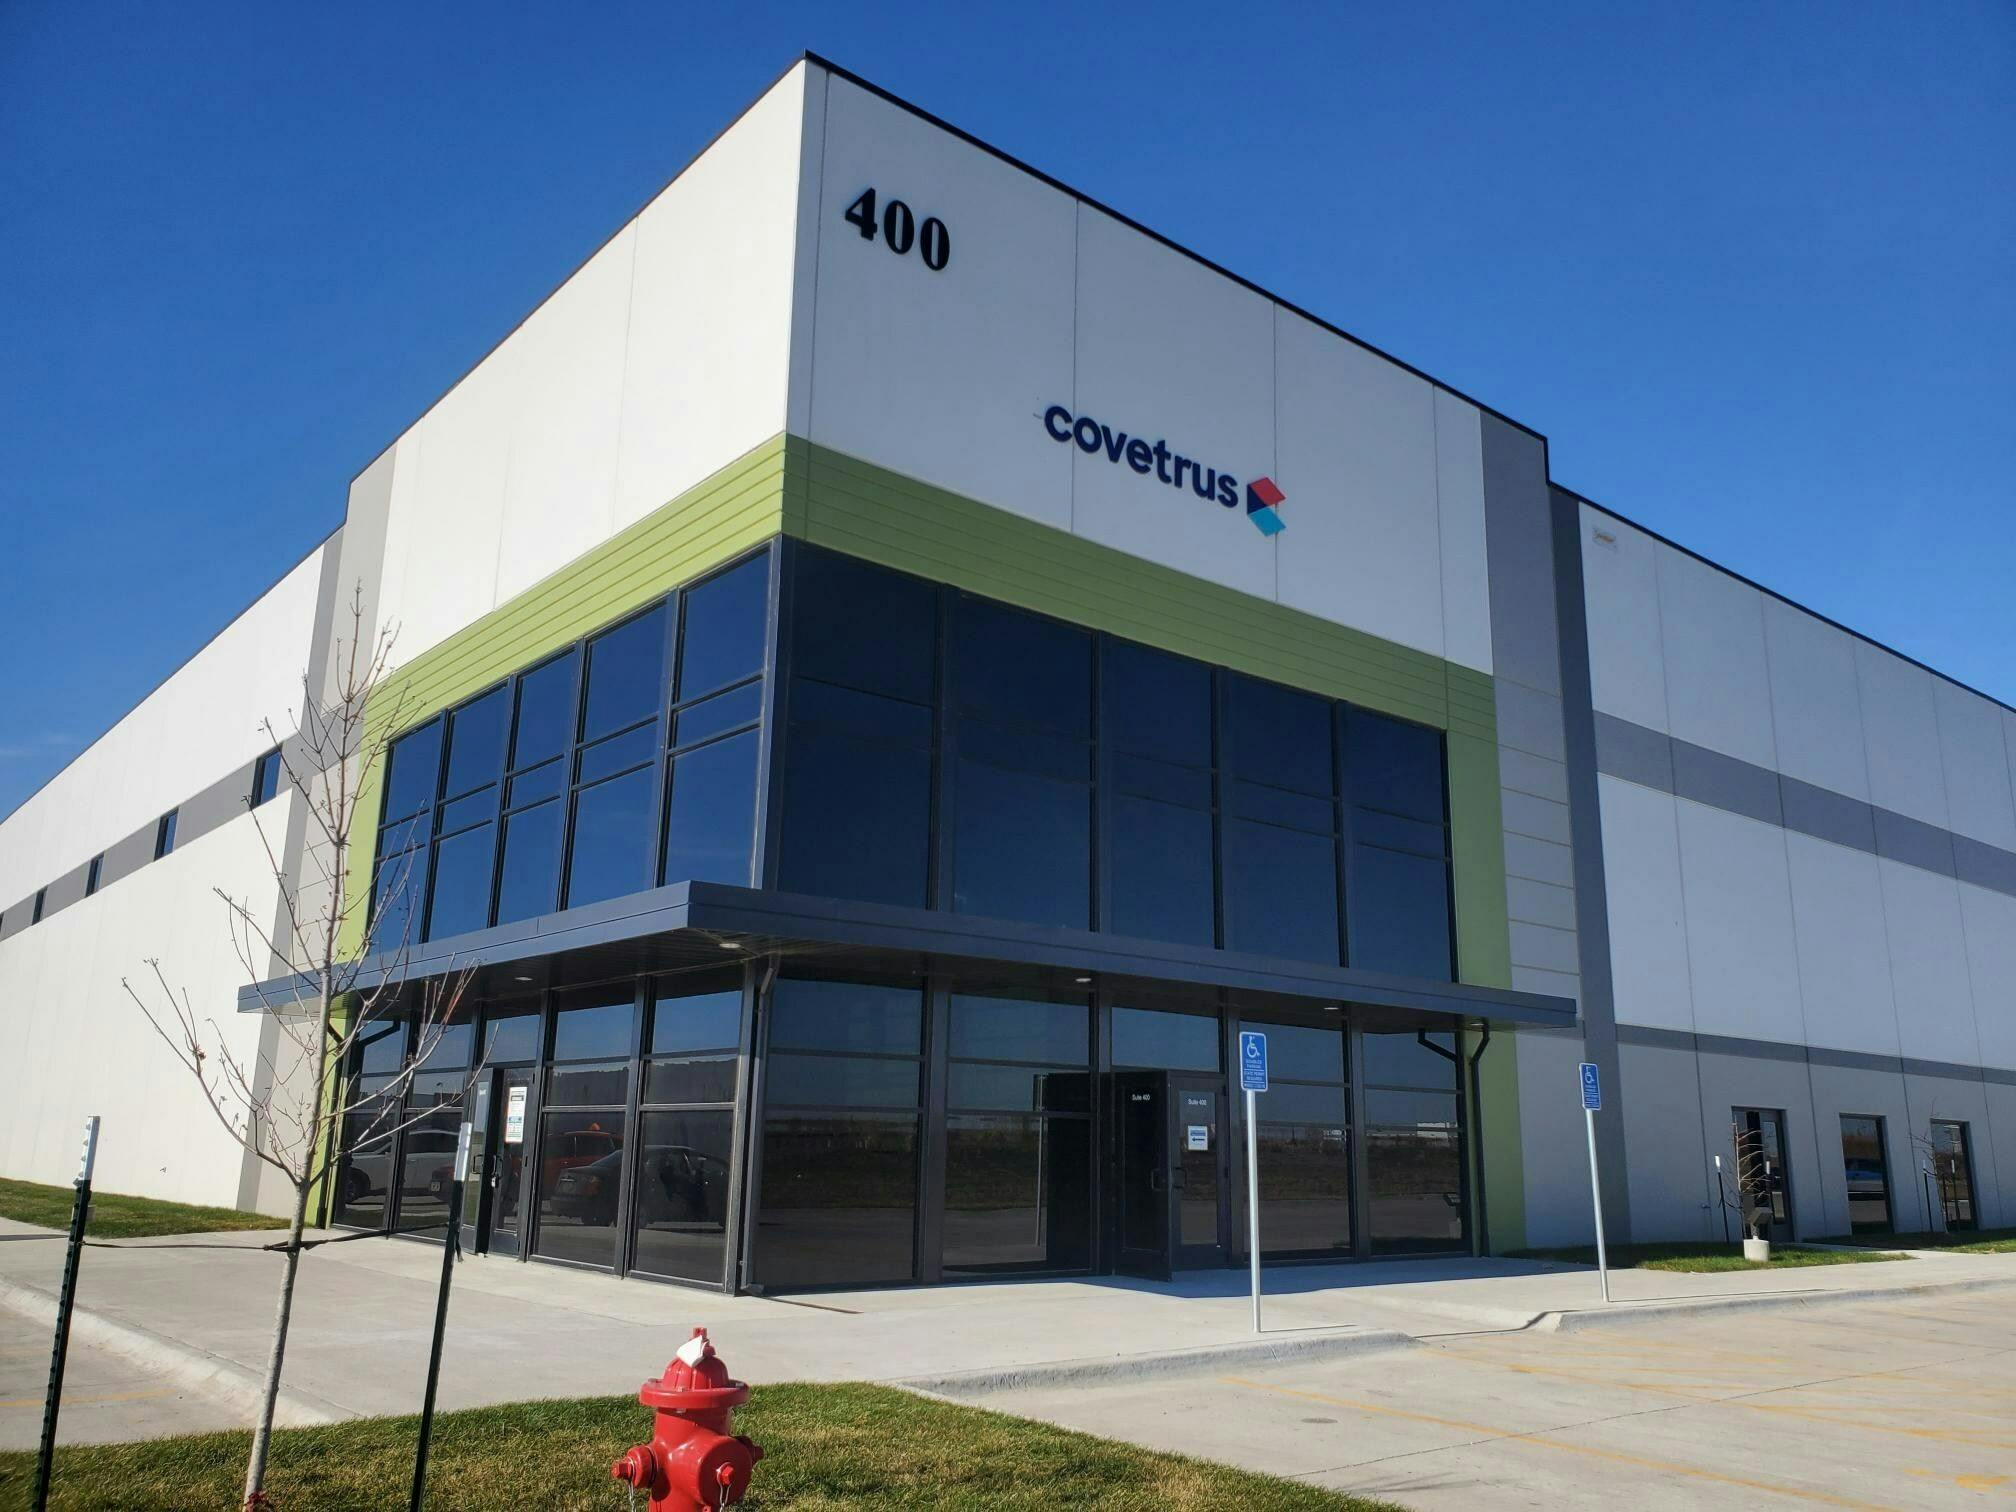 The outside of the new Covetrus distribution center. (Photo courtesy of Covetrus)